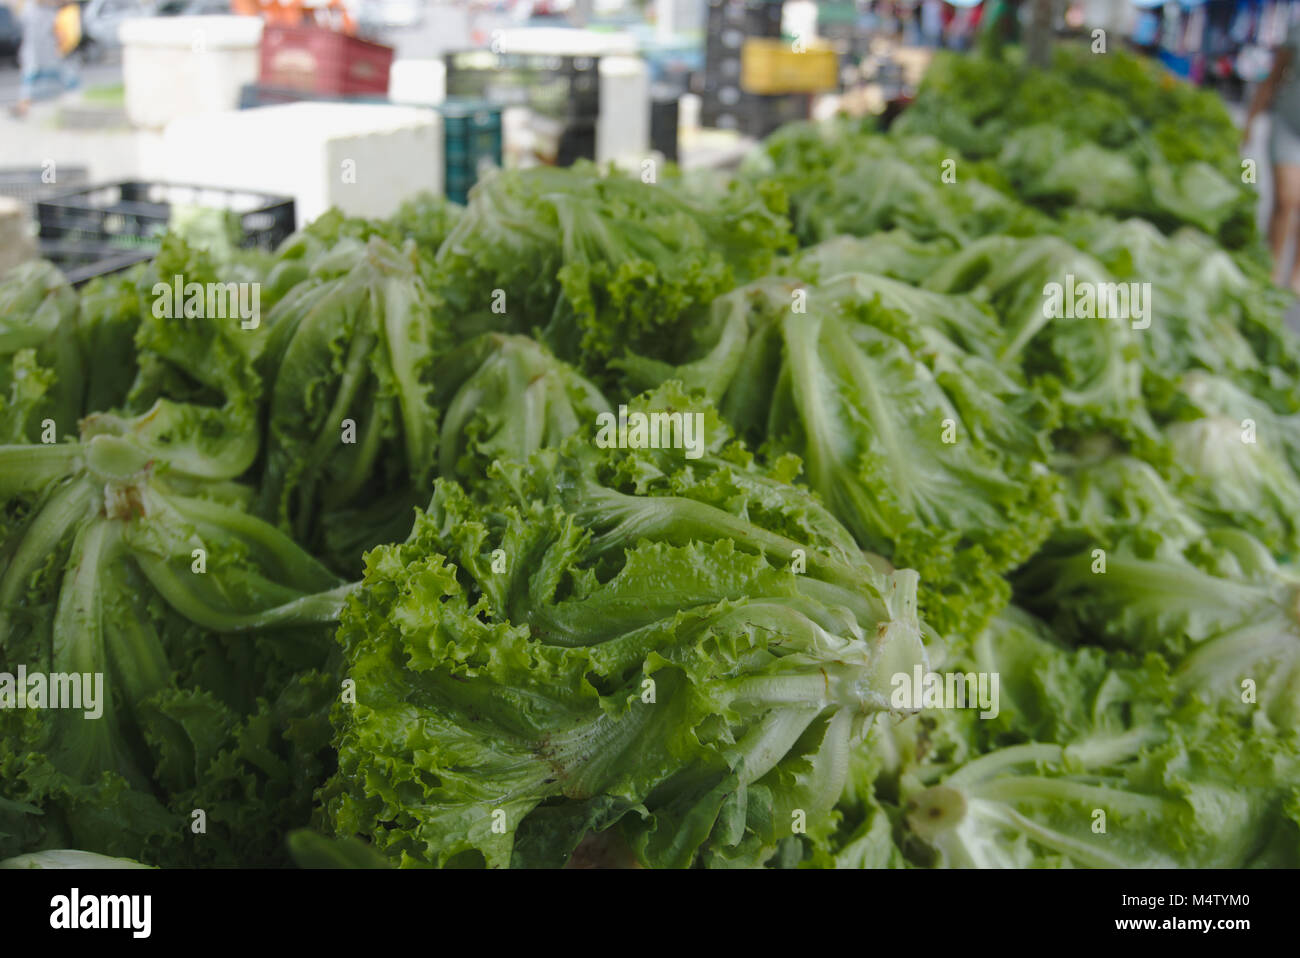 Lettuce at a farmers market stall. Stock Photo